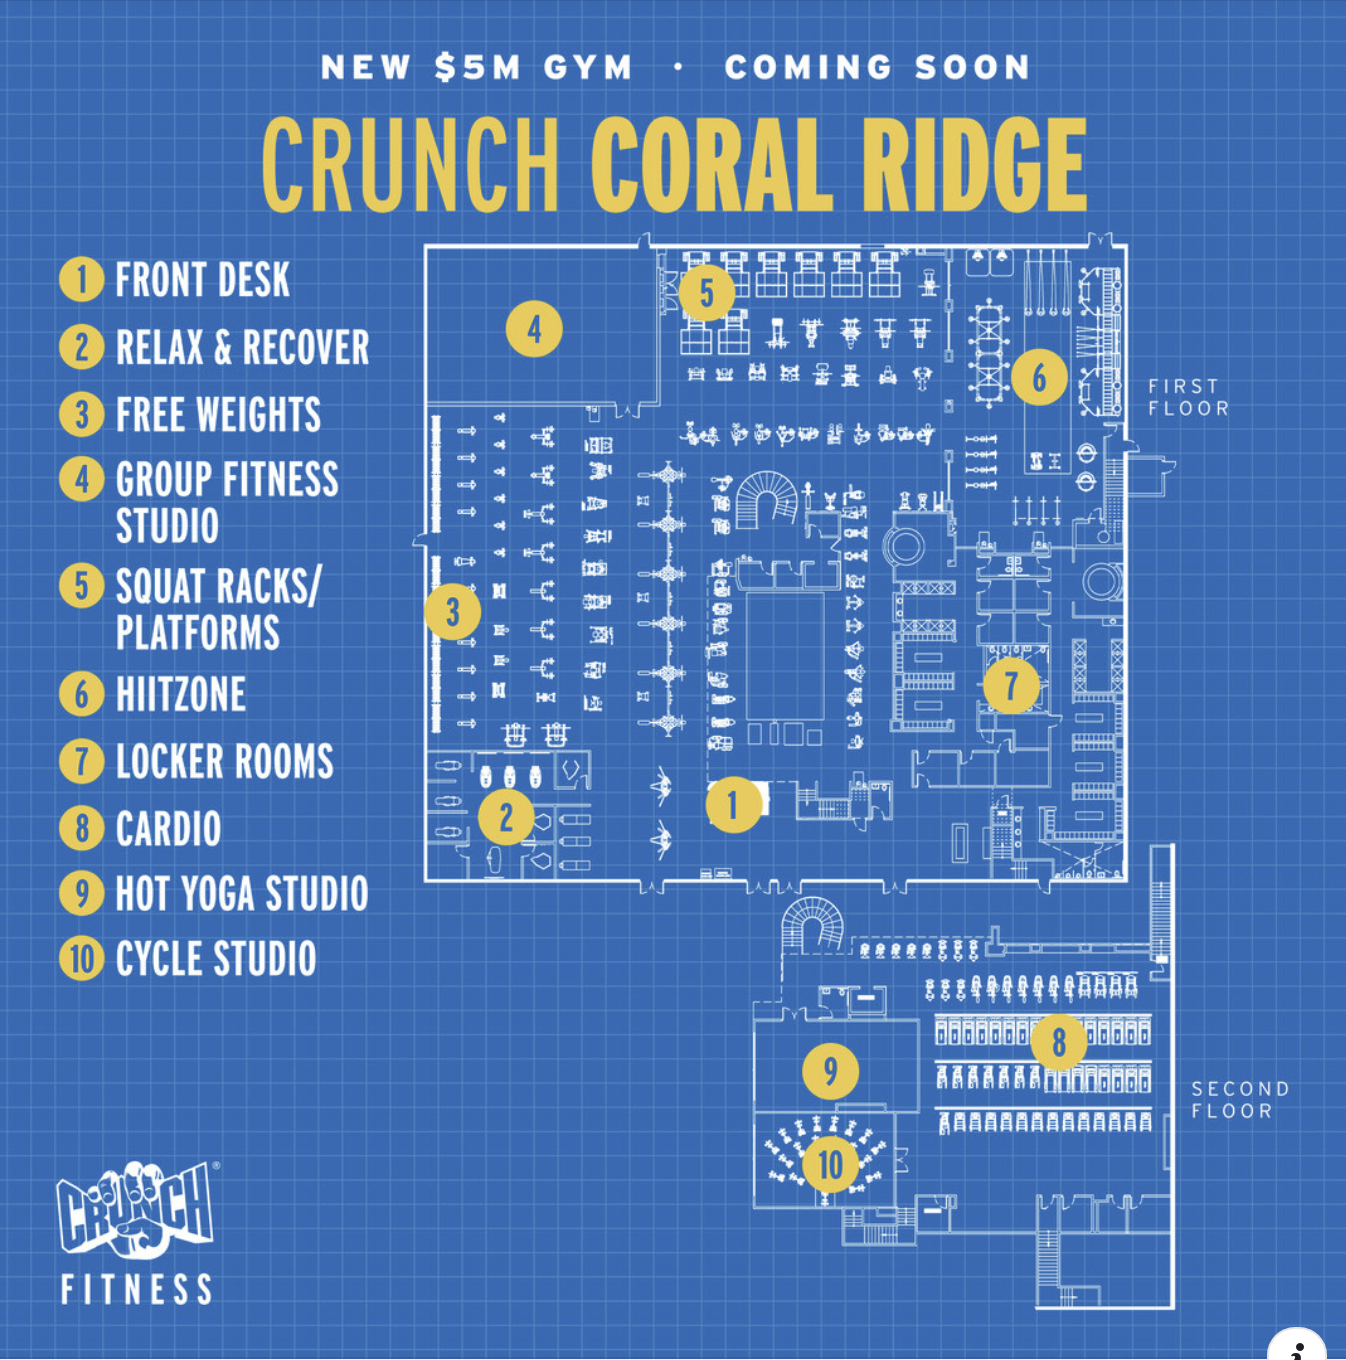 Crunch Fitness to Unveil State-of-the-Art 40,000-square-foot Fitness Facility in North Coral Springs